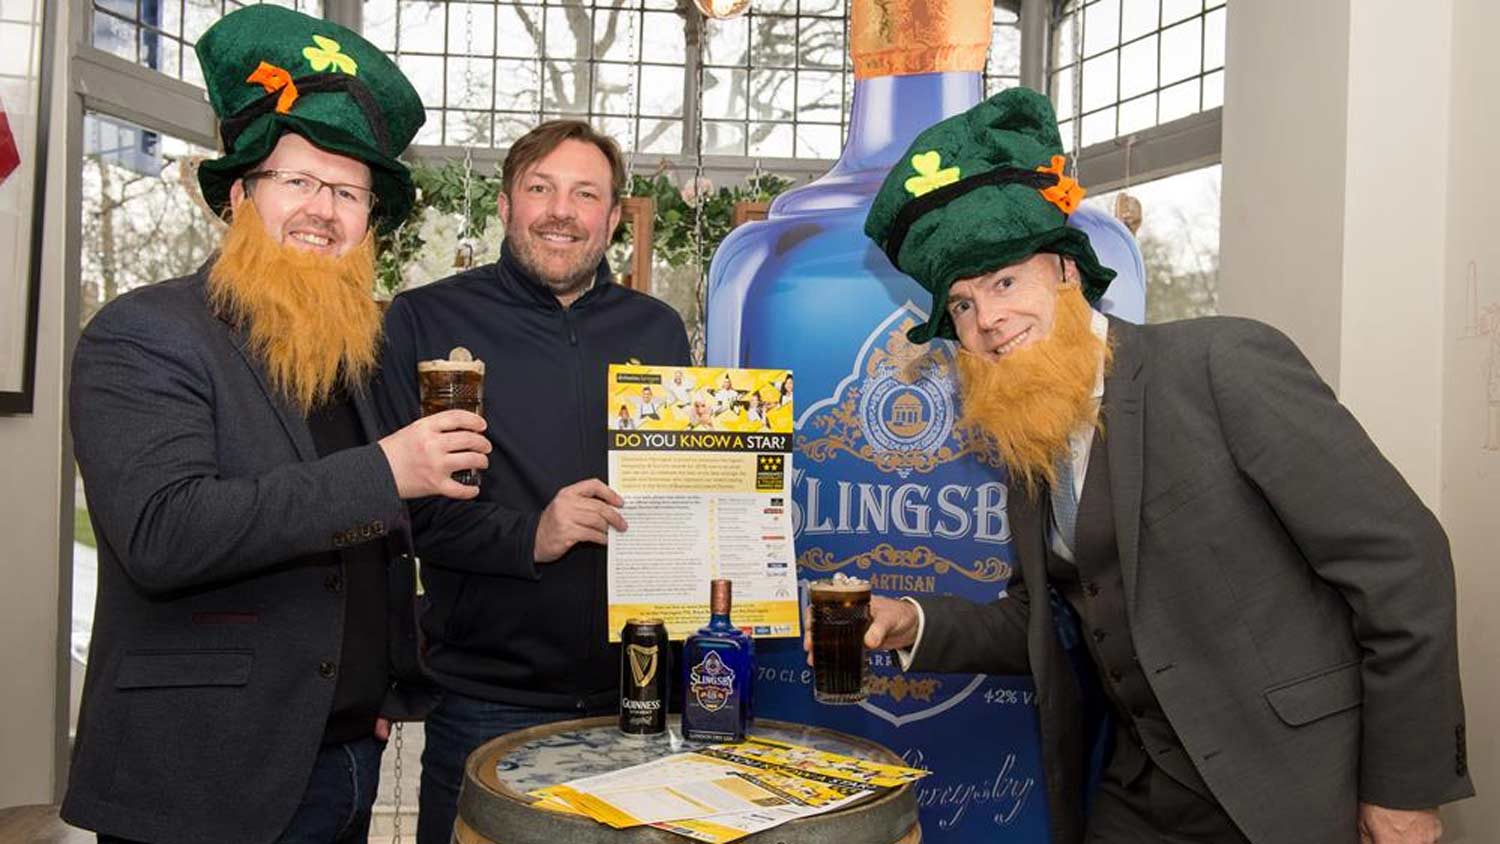 Awards organisers from Destination Harrogate David Ritson (right), Simon Cotton (left) enjoy toasting St Patrick the patron saint of Ireland with Marcus Black (Centre) from Slingsby